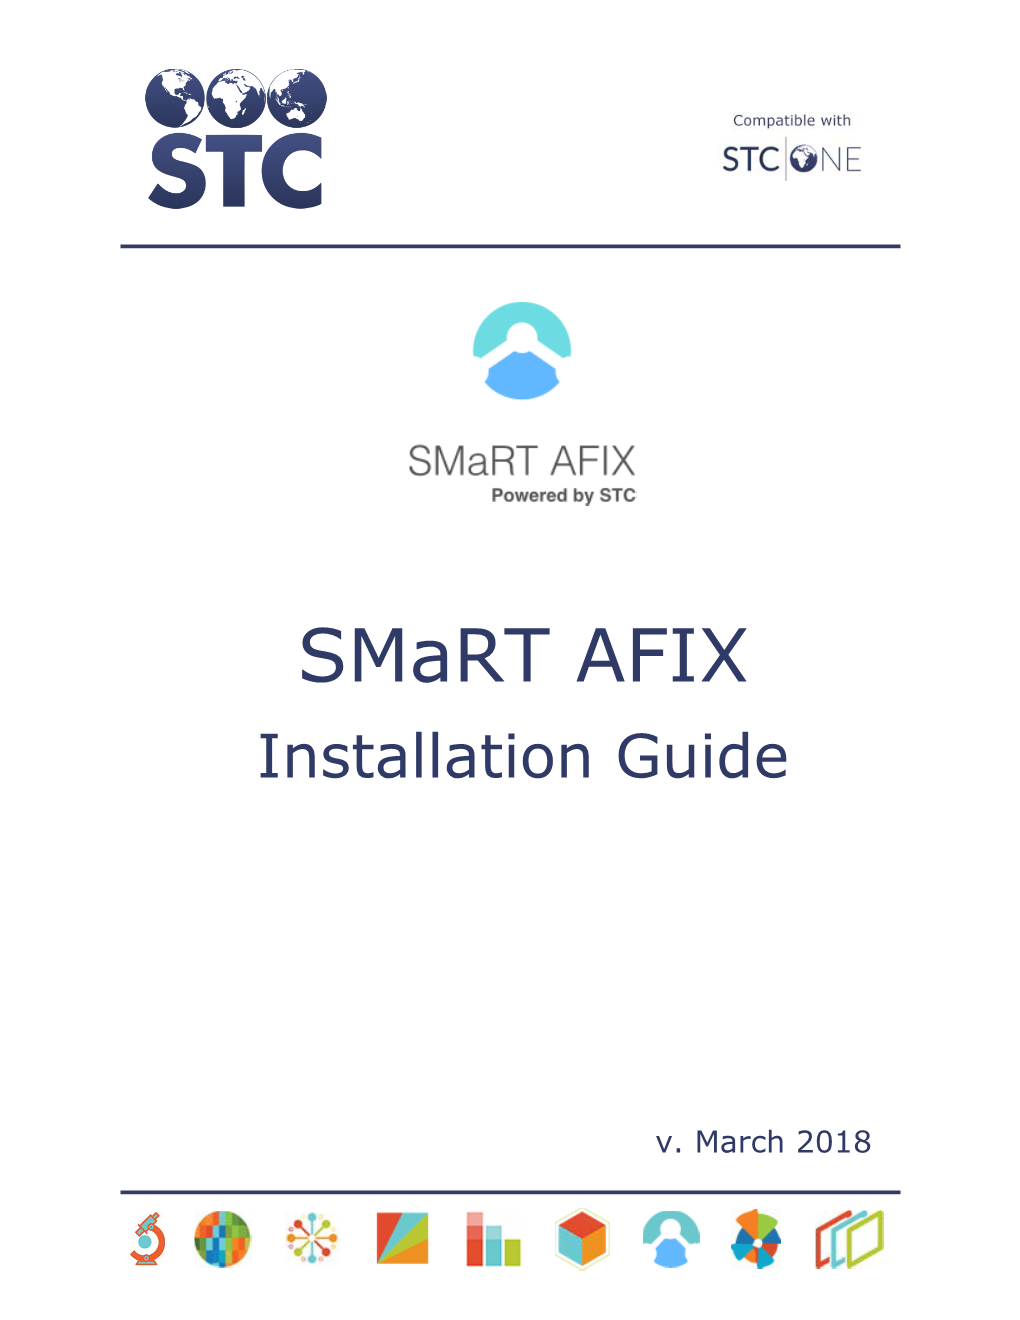 Smart AFIX (V. March 2018) Installation Guide for STC-Hosted Clients